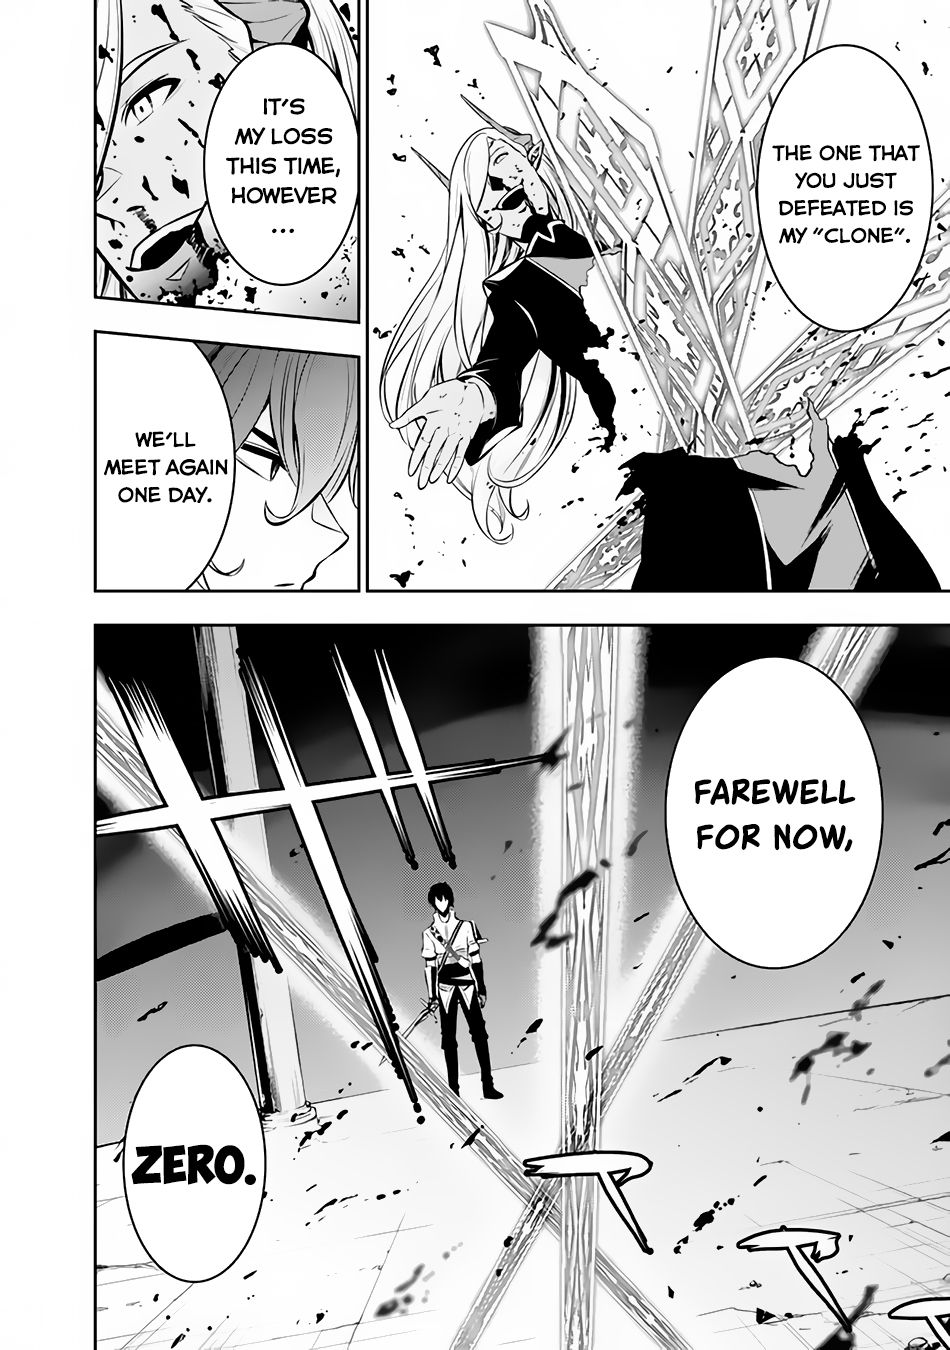 The Strongest Magical Swordsman Ever Reborn As An F-Rank Adventurer. - Page 5